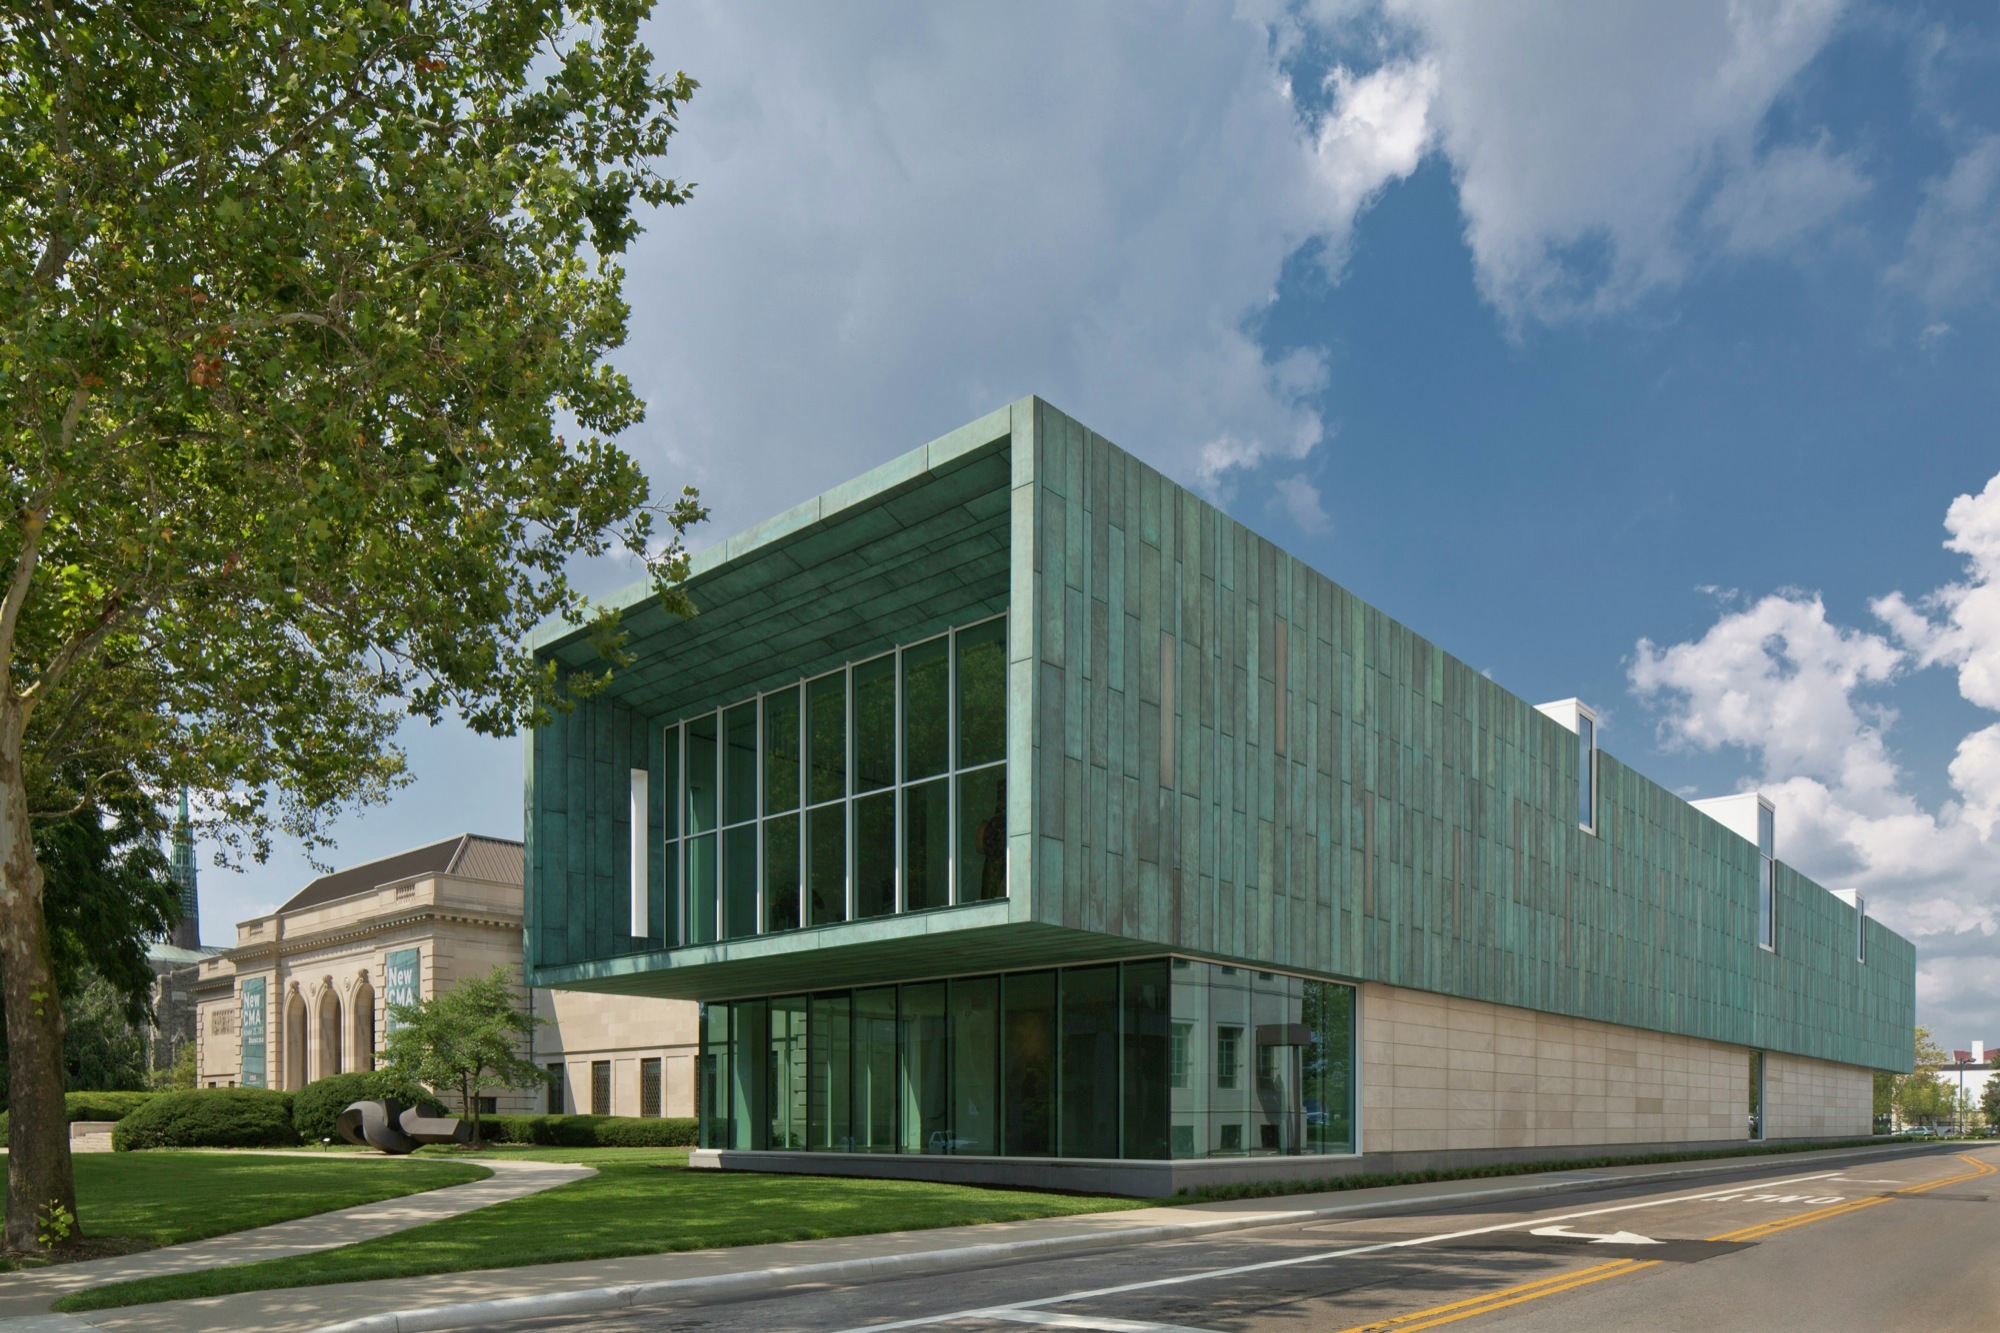 Columbus Museum of Art is opening the new Margaret M. Walter Wing 